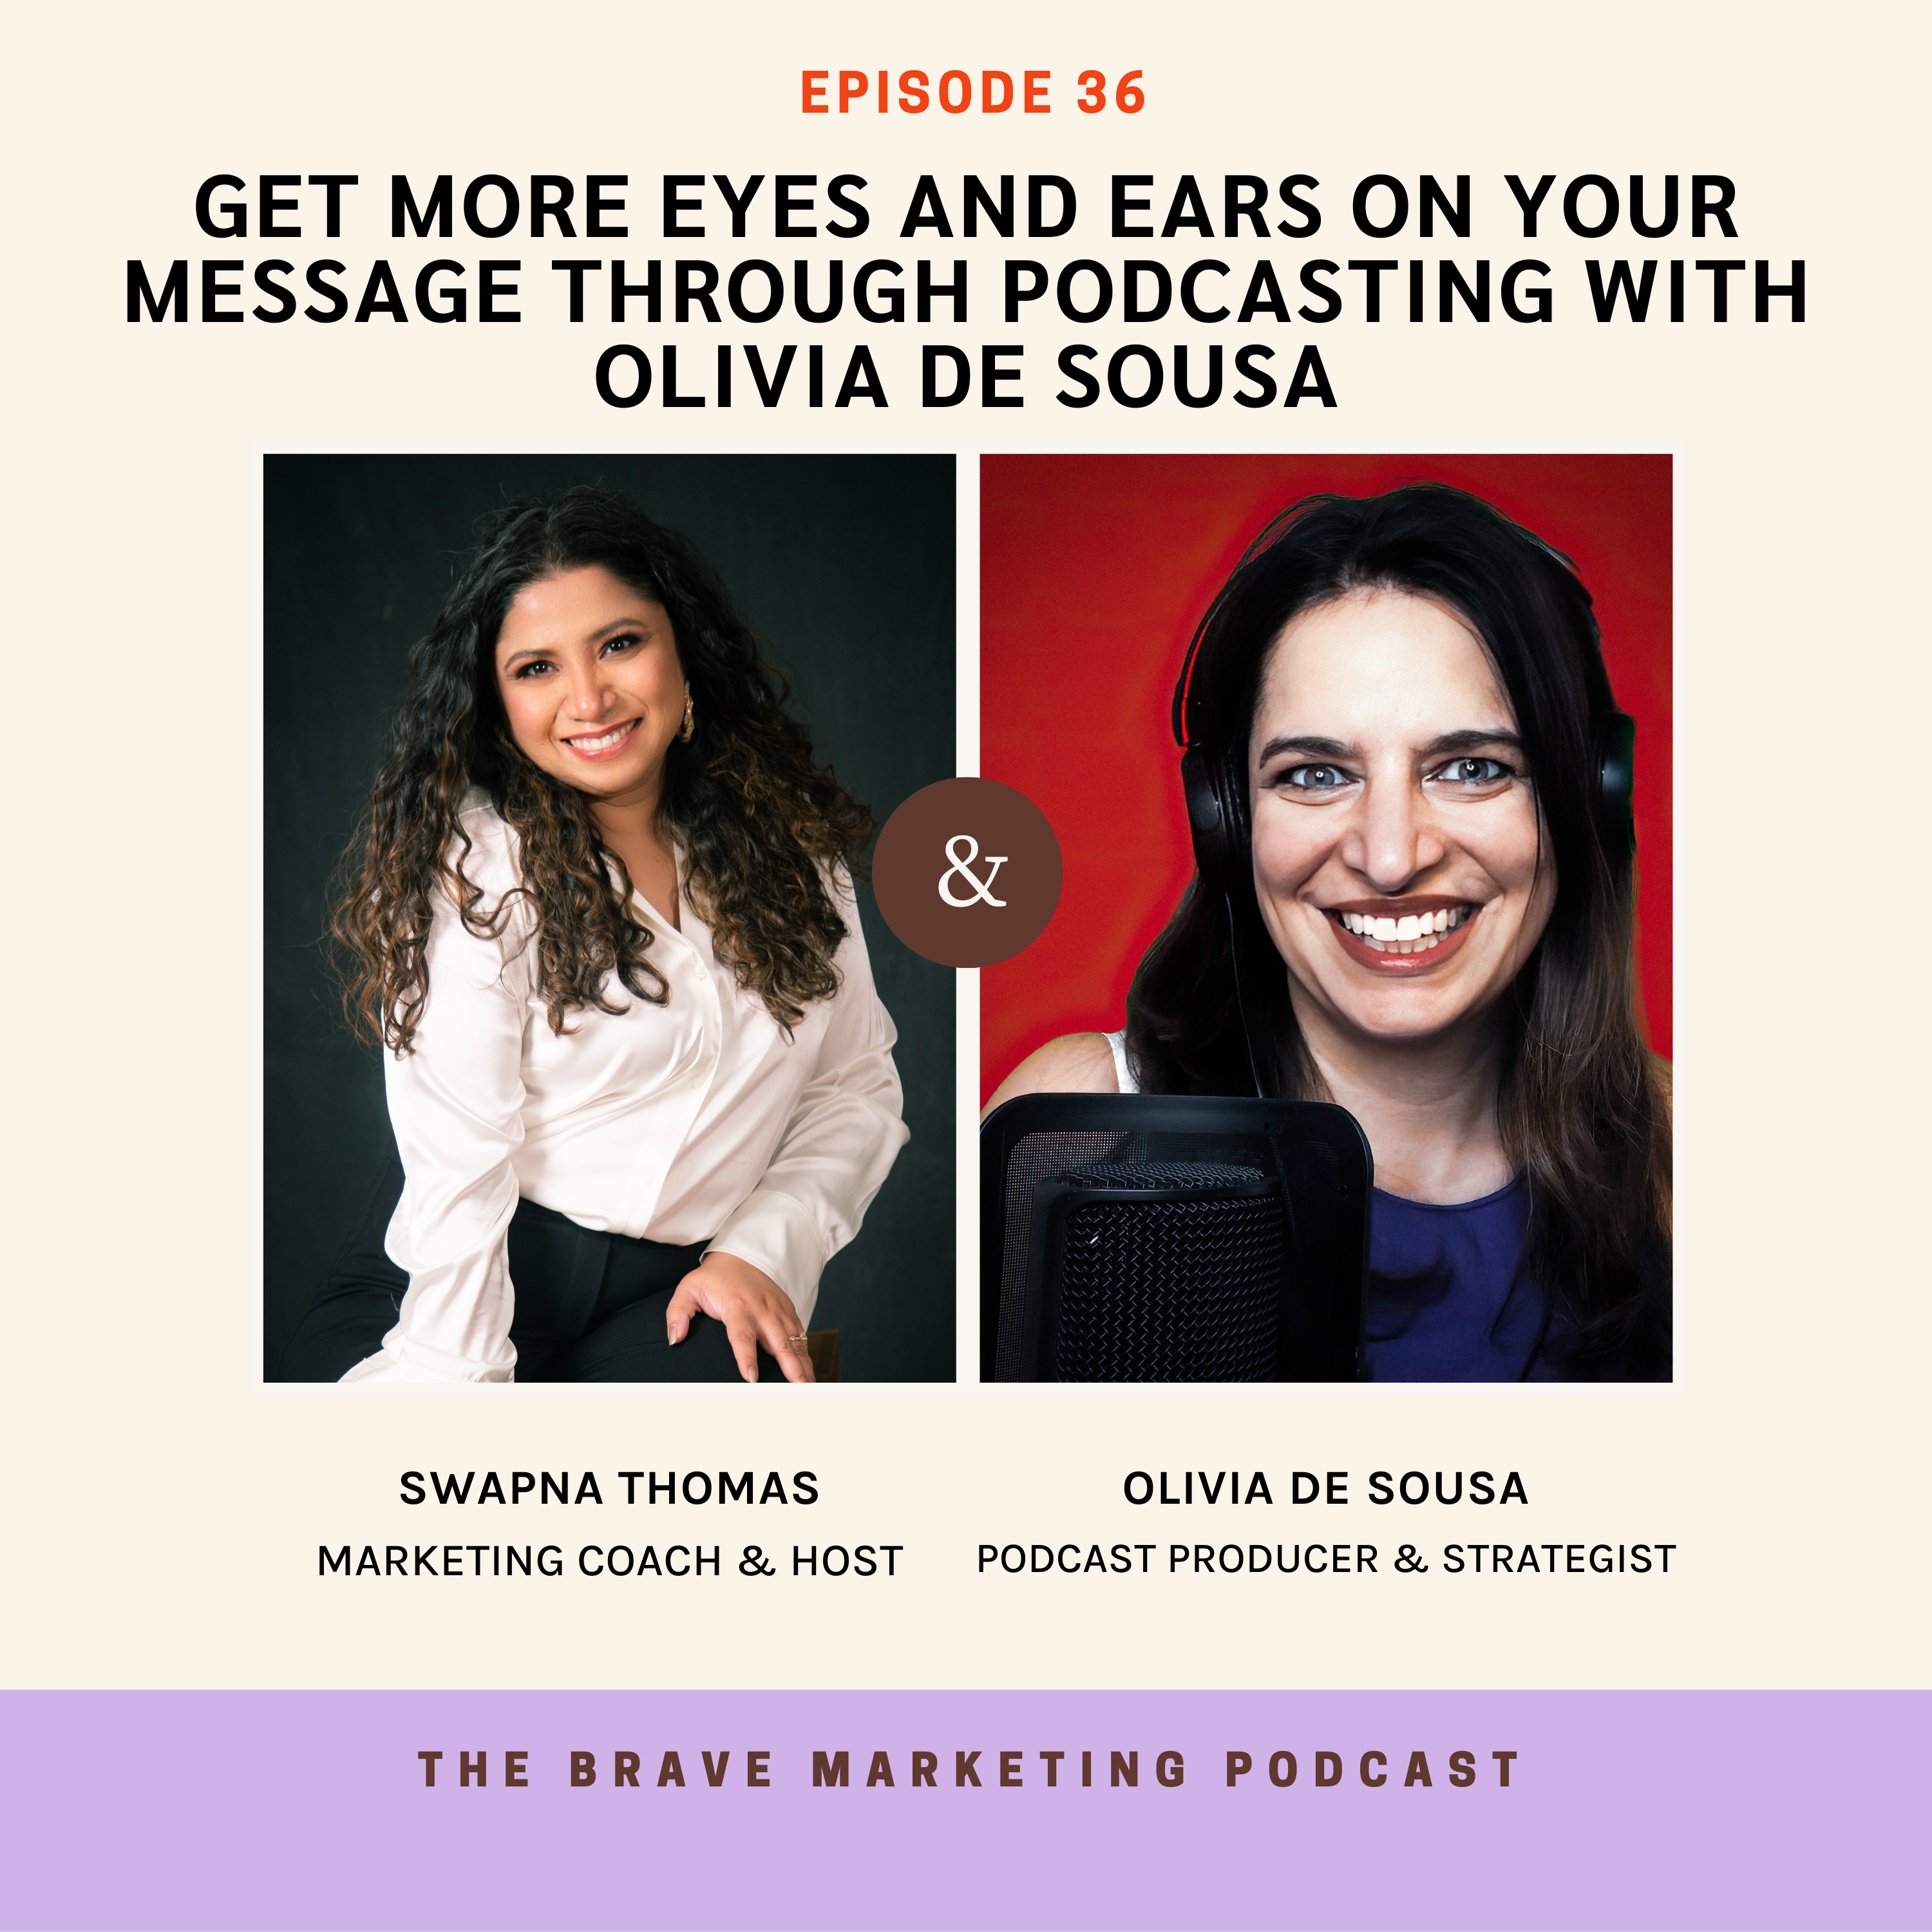 Get more eyes and ears on your message through podcasting with Olivia de Sousa